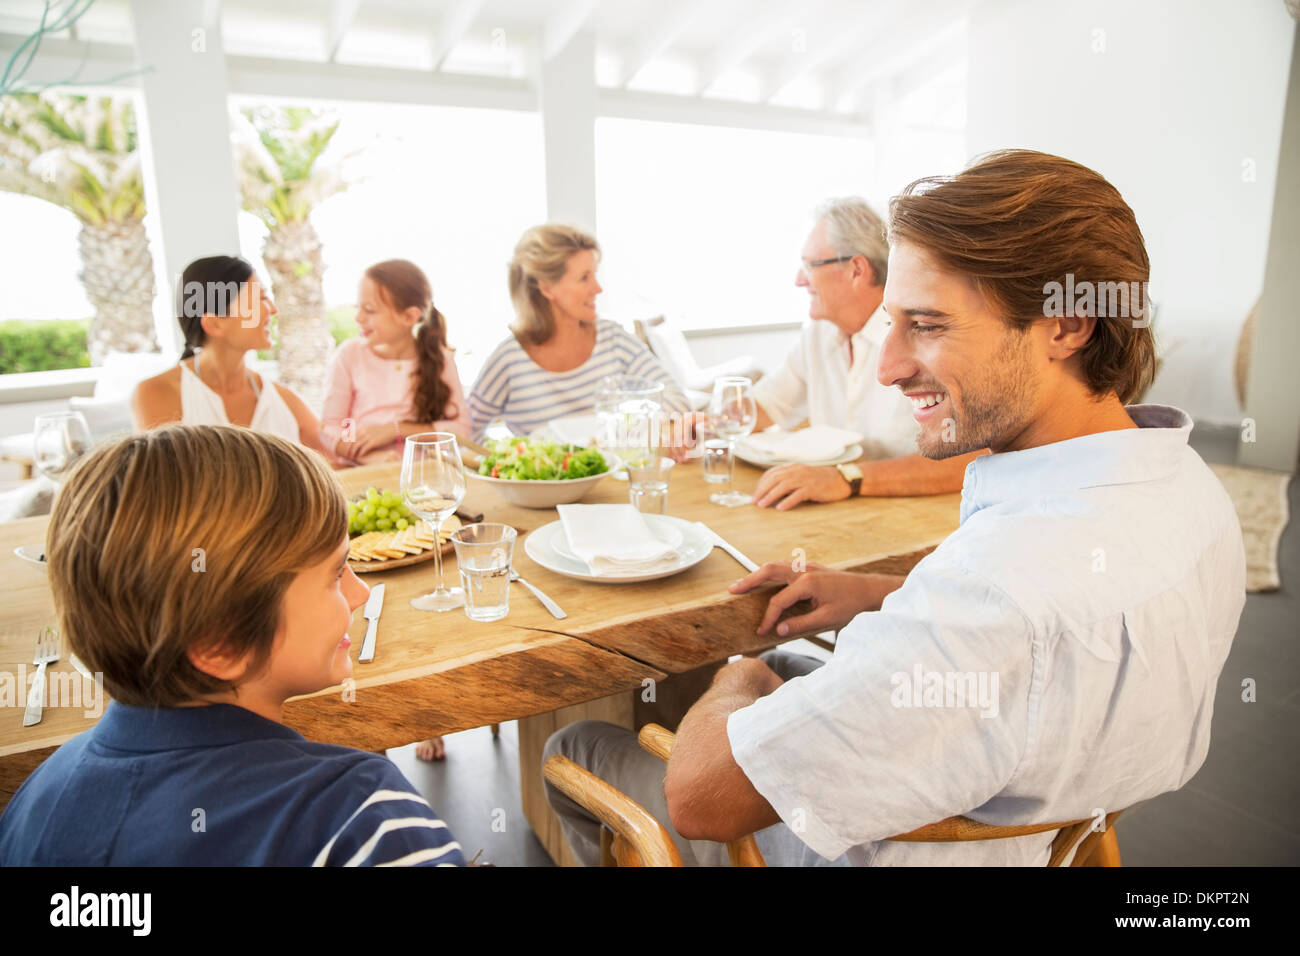 Multi-generation family eating together at table Stock Photo